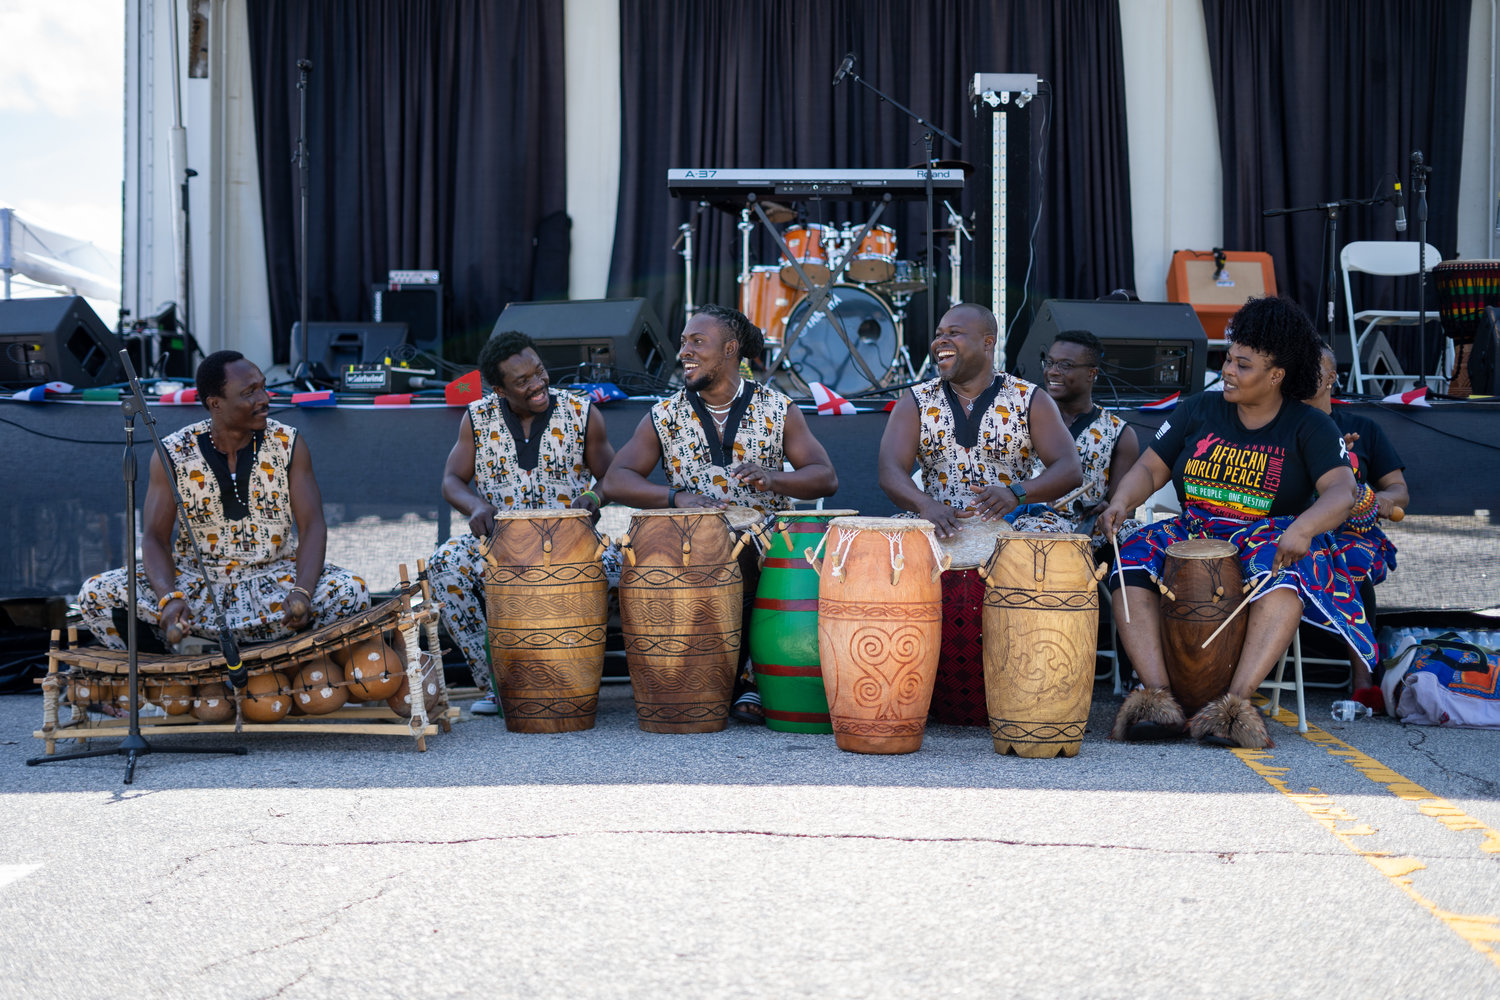 The Aya African Drum and Dance group